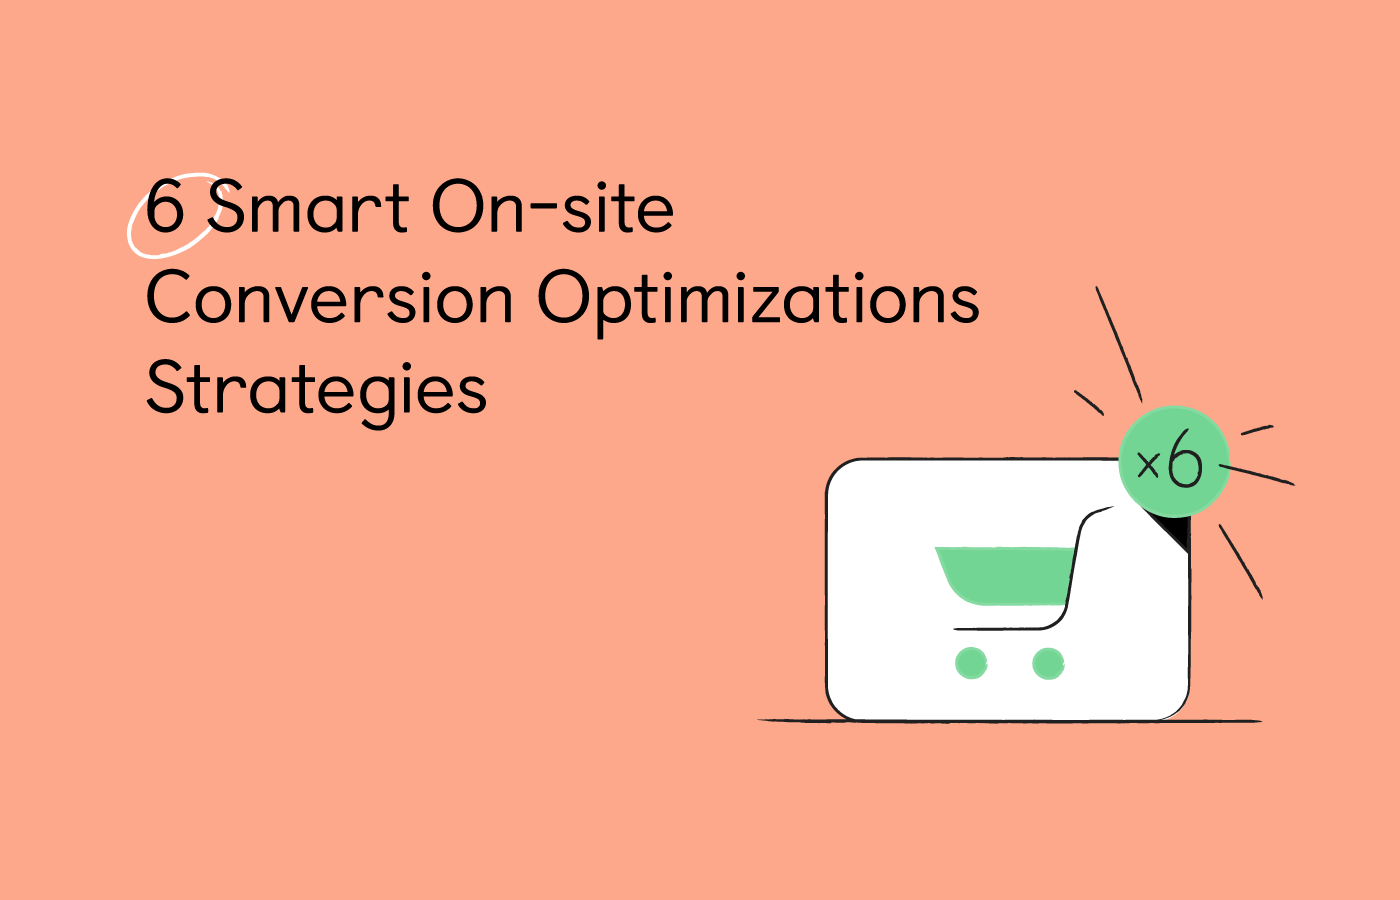 On-site conversion optimization strategies to turn visitors into customers